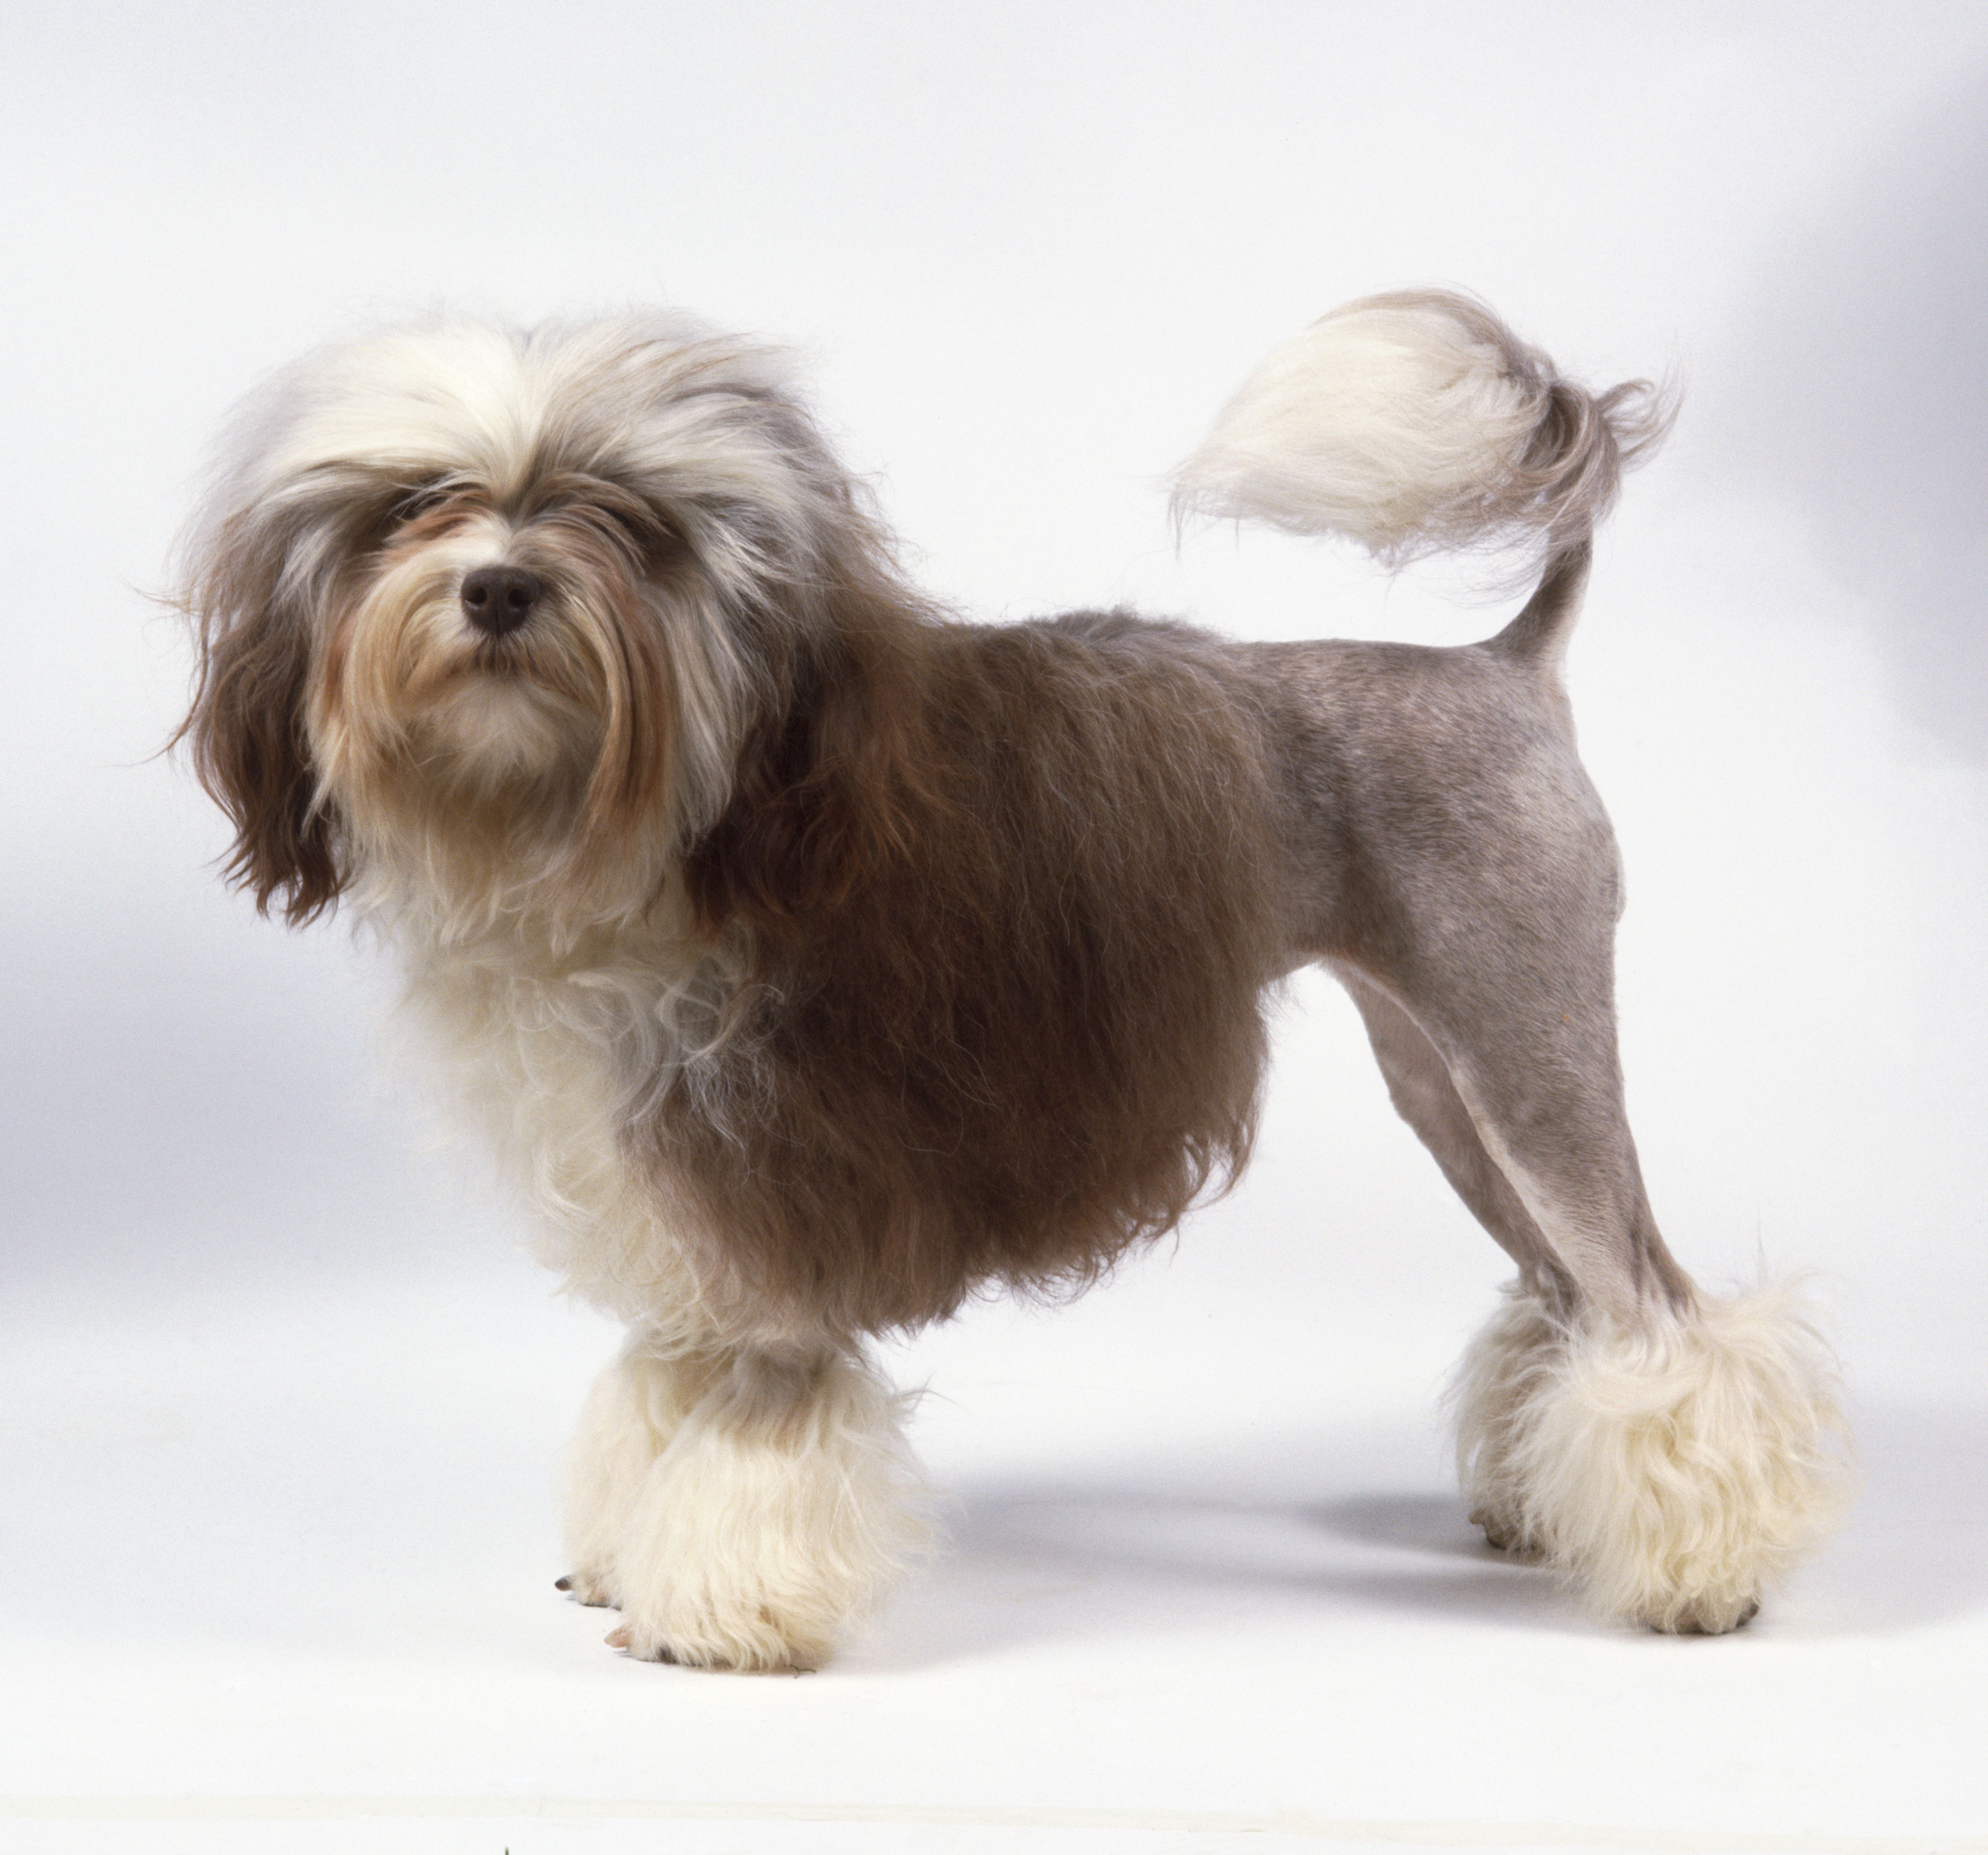 A lowchen dog with grayish-brown hair on the front of its body, shaved hind quarters, and decorative tufts on its legs and tail